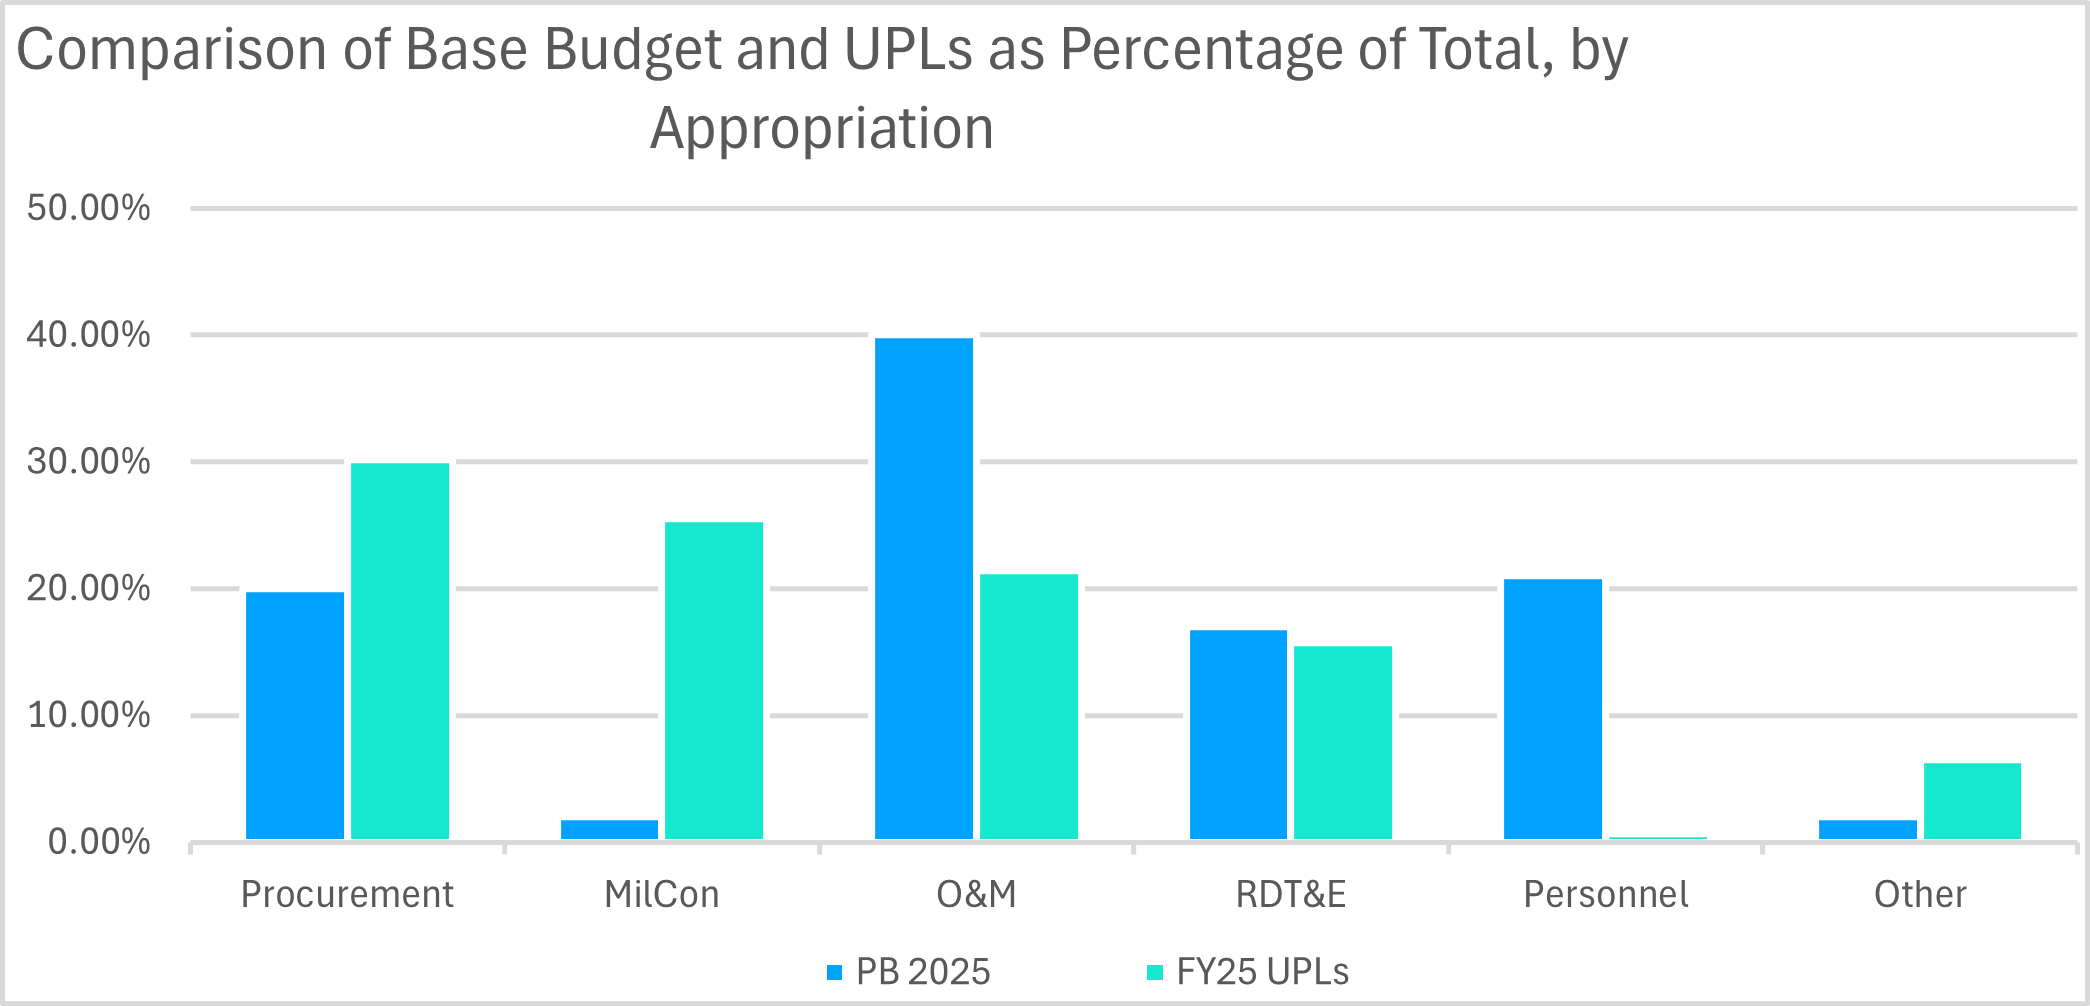 Base budget and UPL